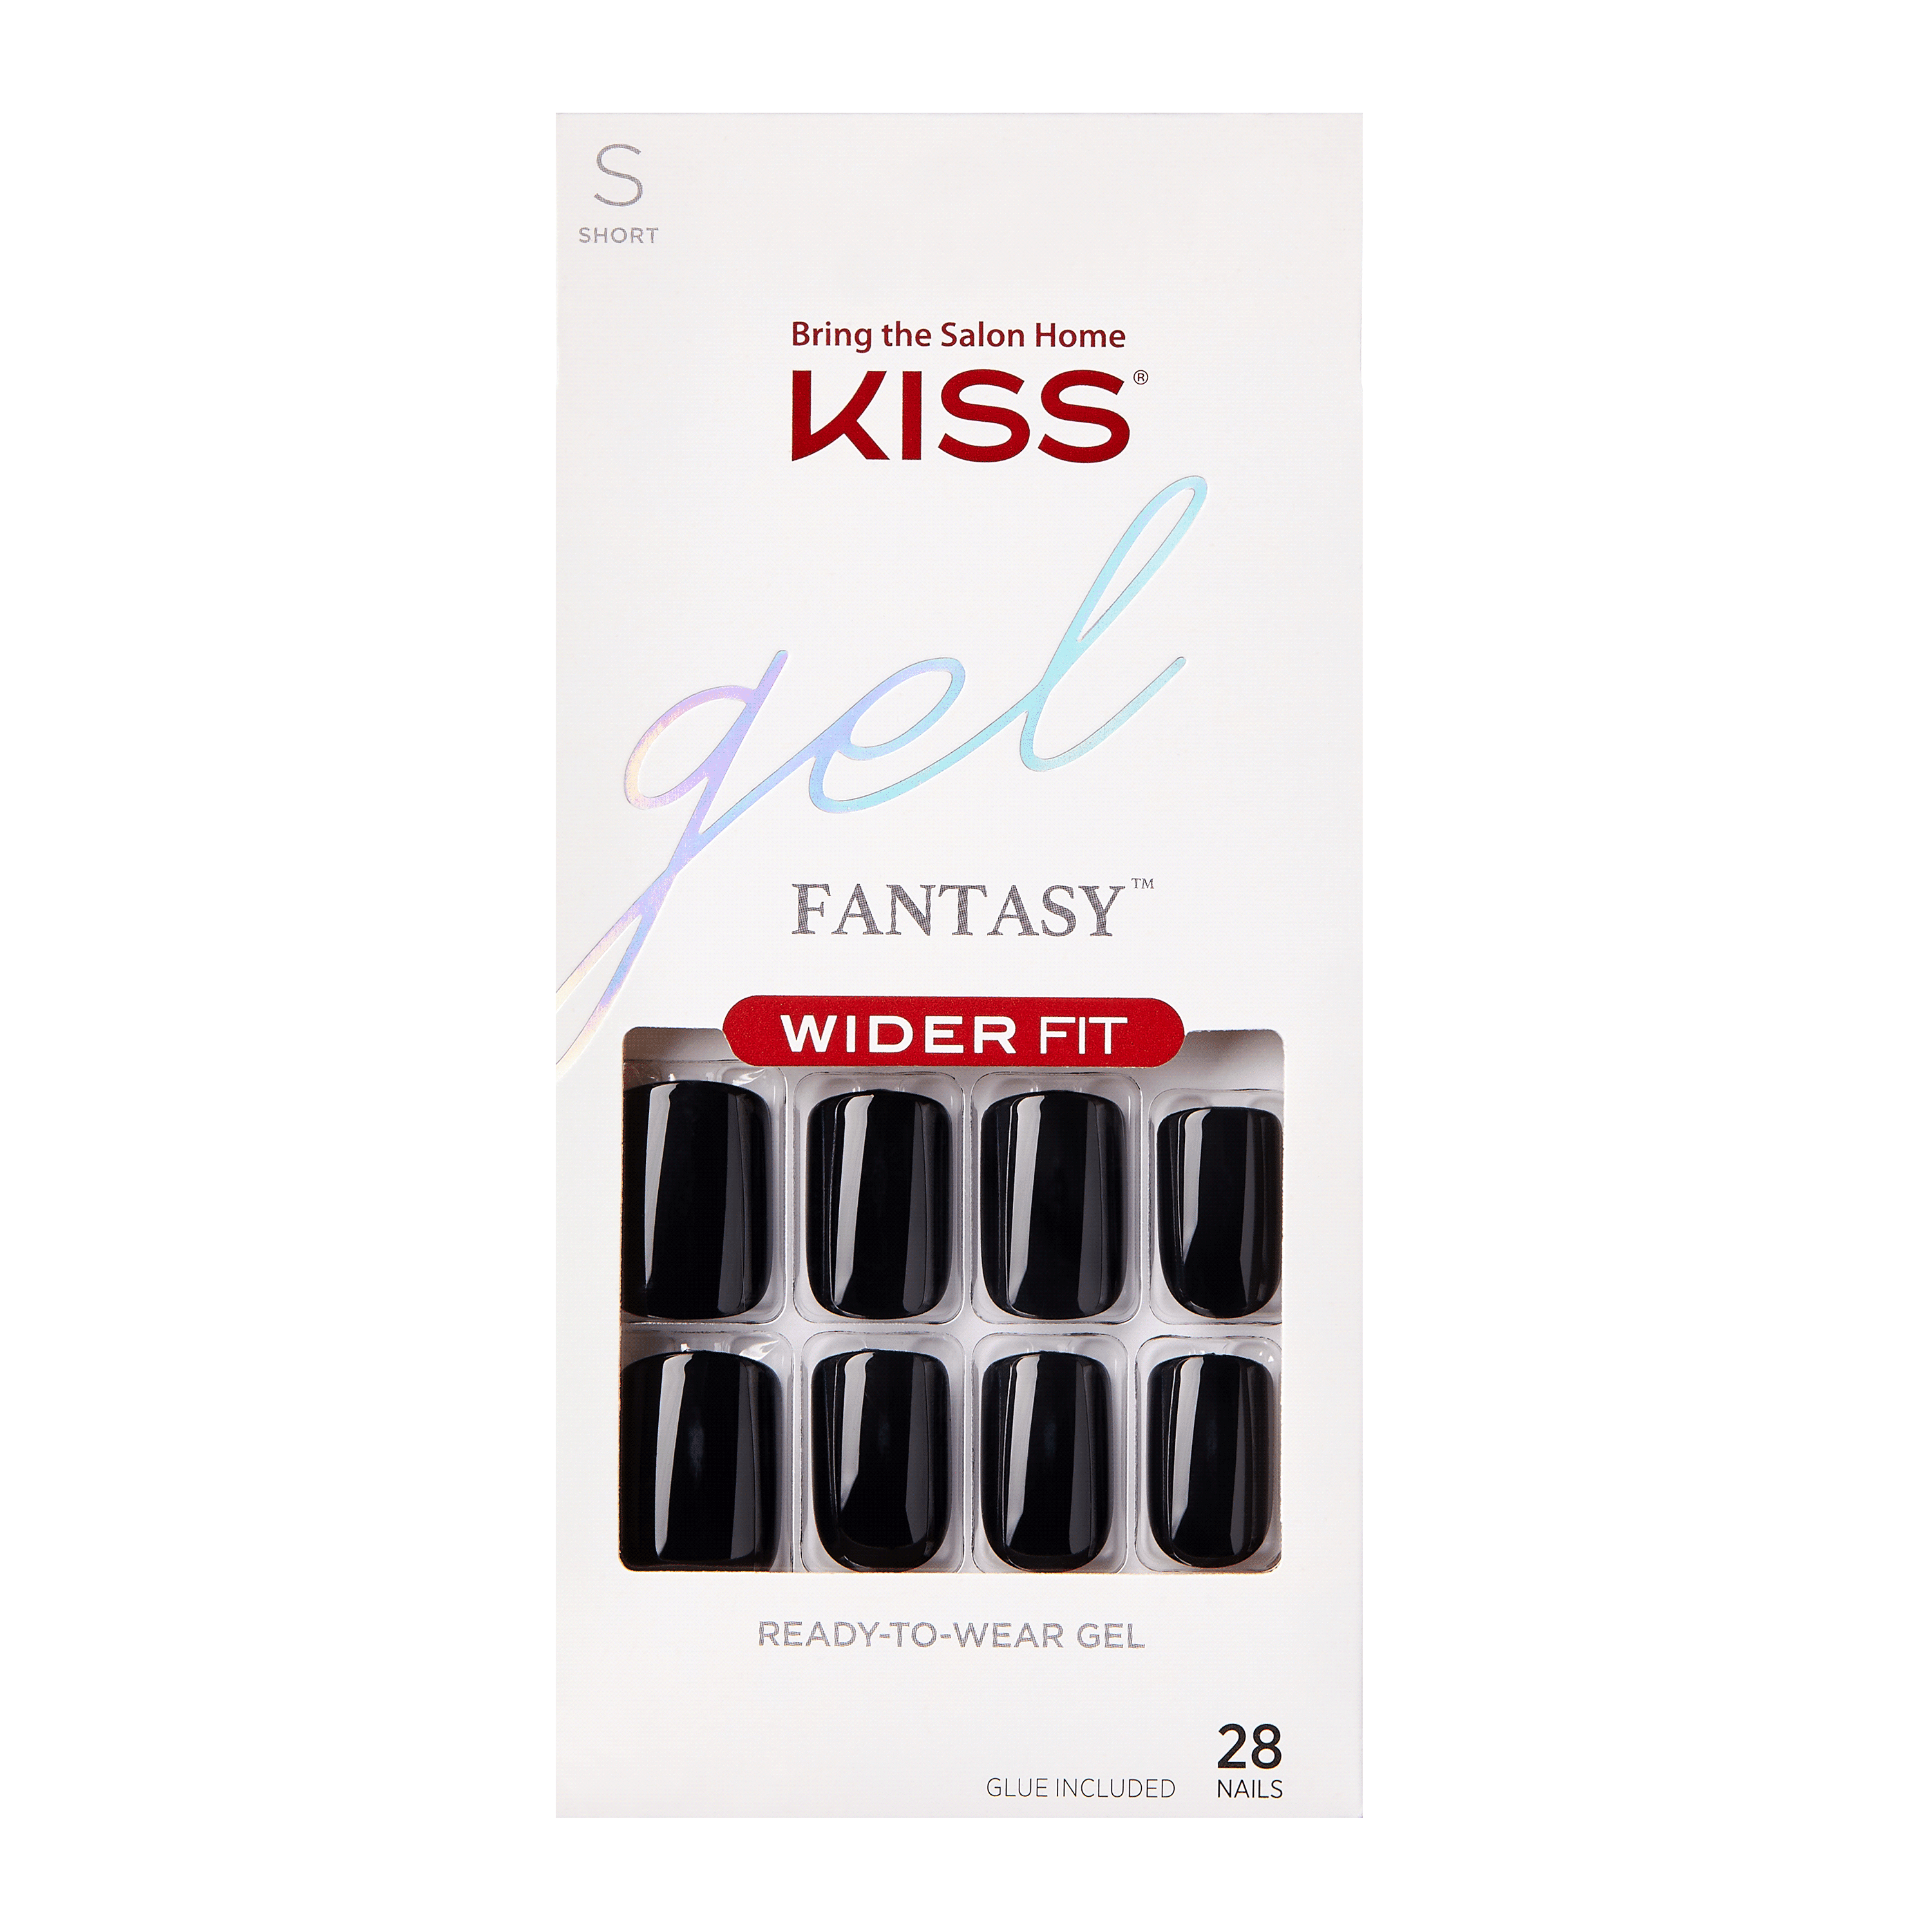 KISS Gel Fantasy Ready-to-Wear Fake Nails, Just Right, 28 Count